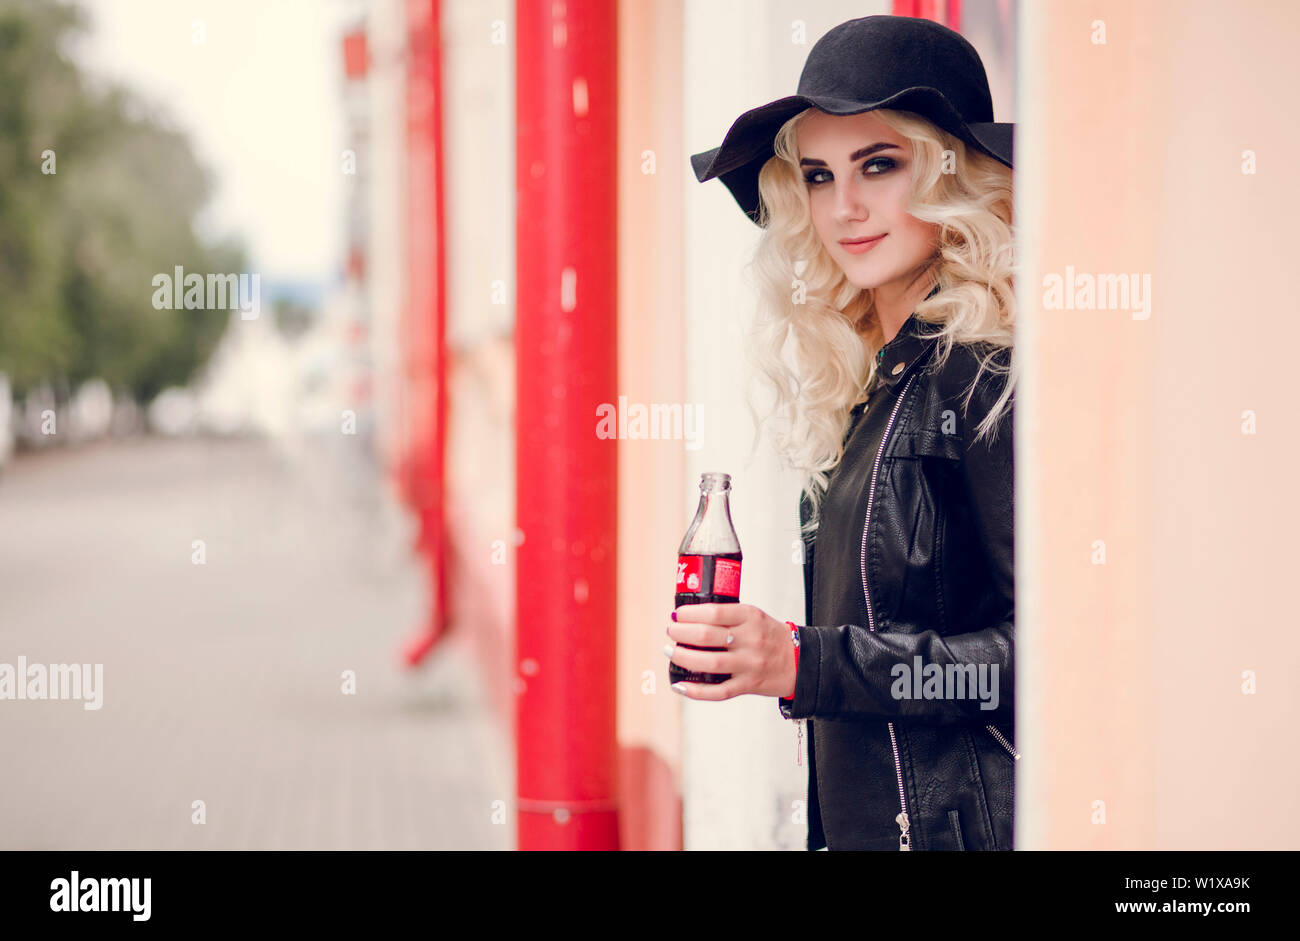 Minsk, Belarus - September 26, 2018. Photo of Fashionable adult girl with a bottle of coca-cola in their hands Stock Photo